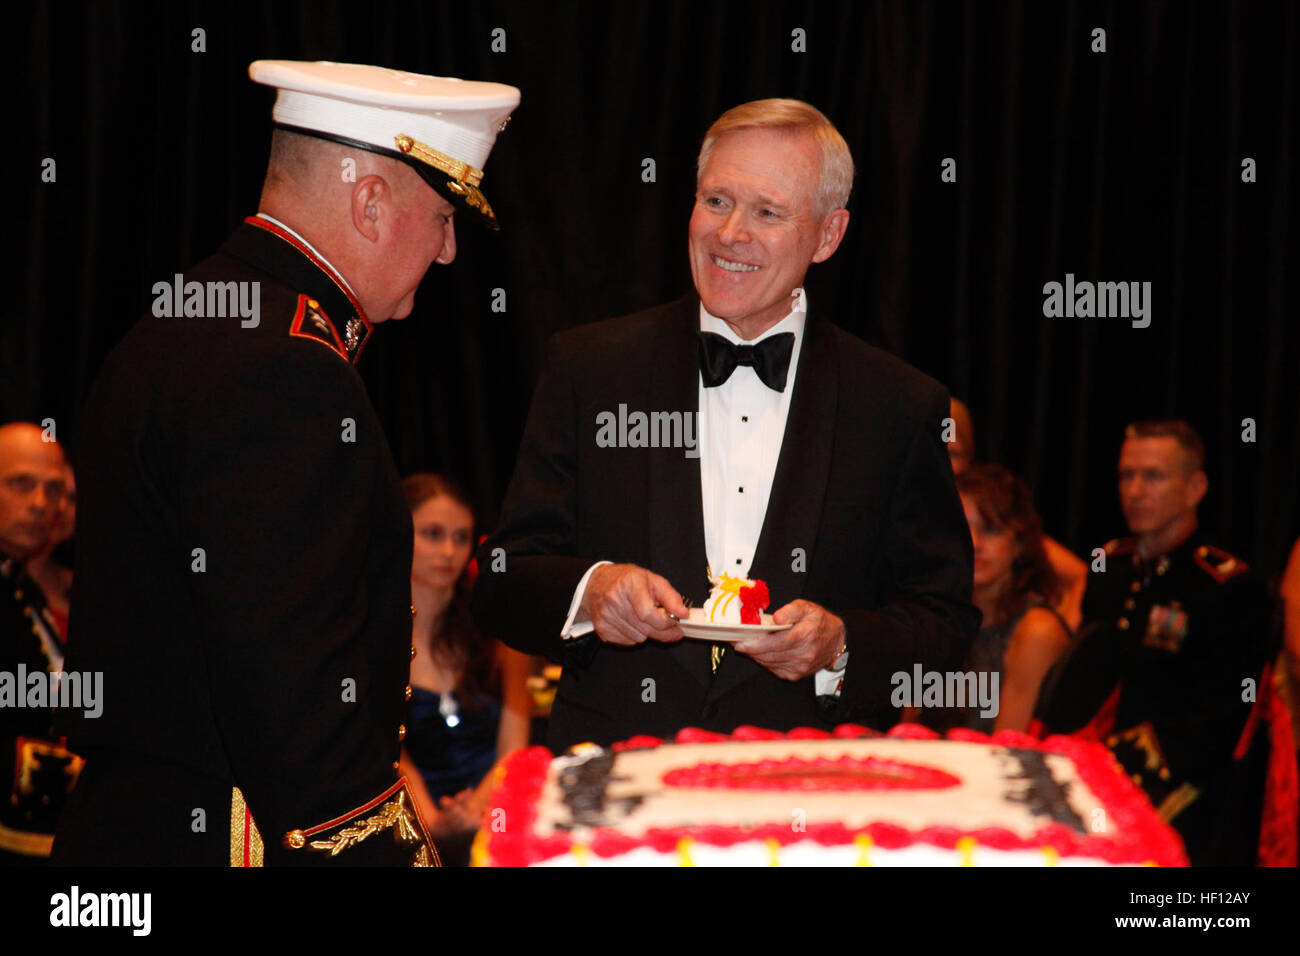 Maj. Gen. Glenn M. Walters, left, commanding general of 2nd Marine Aircraft Wing, hands Secretary of the Navy Ray Mabus a piece of the Marine Corps birthday cake during the wing's 237th Marine Corps birthday ball celebration in New Bern. Mabus said the night was all about celebrating history, tradition and heritage. Marine Corps Air Station Cherry Point Year In Review 121107-M-AF823-060 Stock Photo